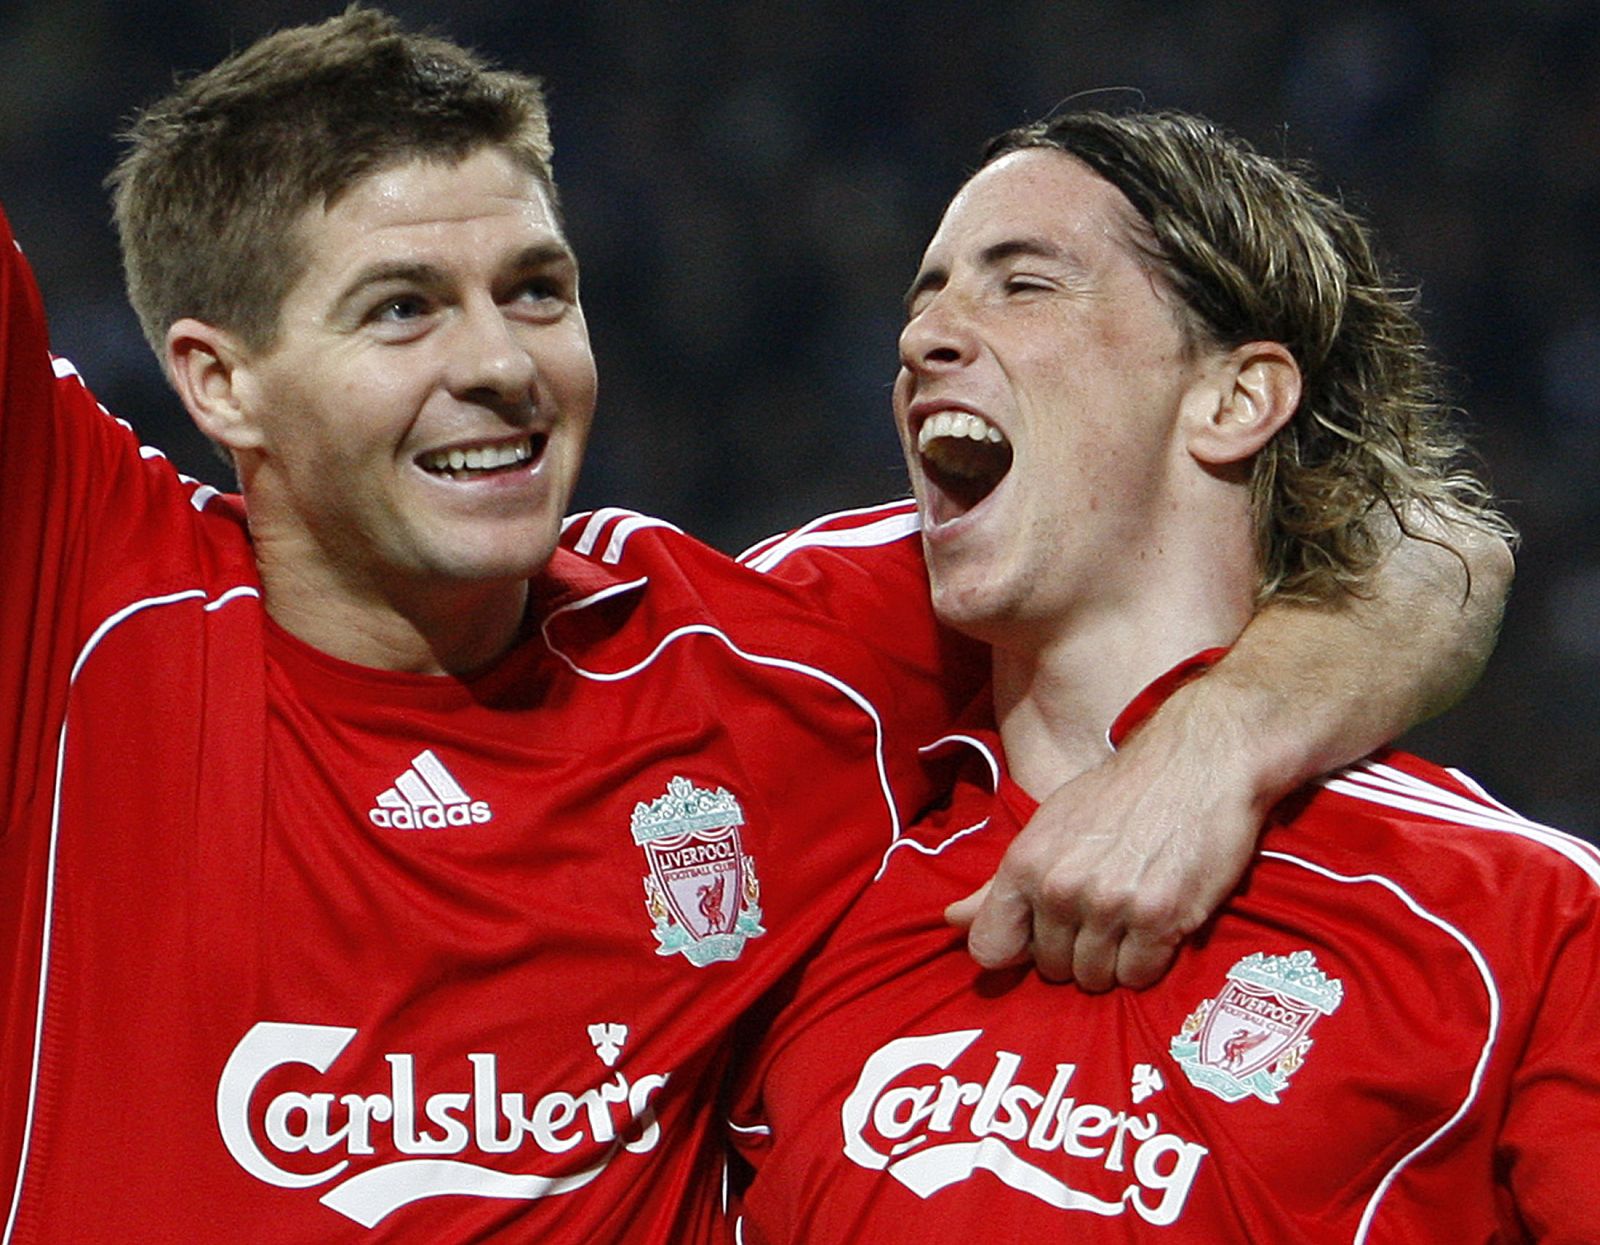 Liverpool's Torres celebrates goal aginst Inter Milan with Gerrard during Champions League soccer match in Milan